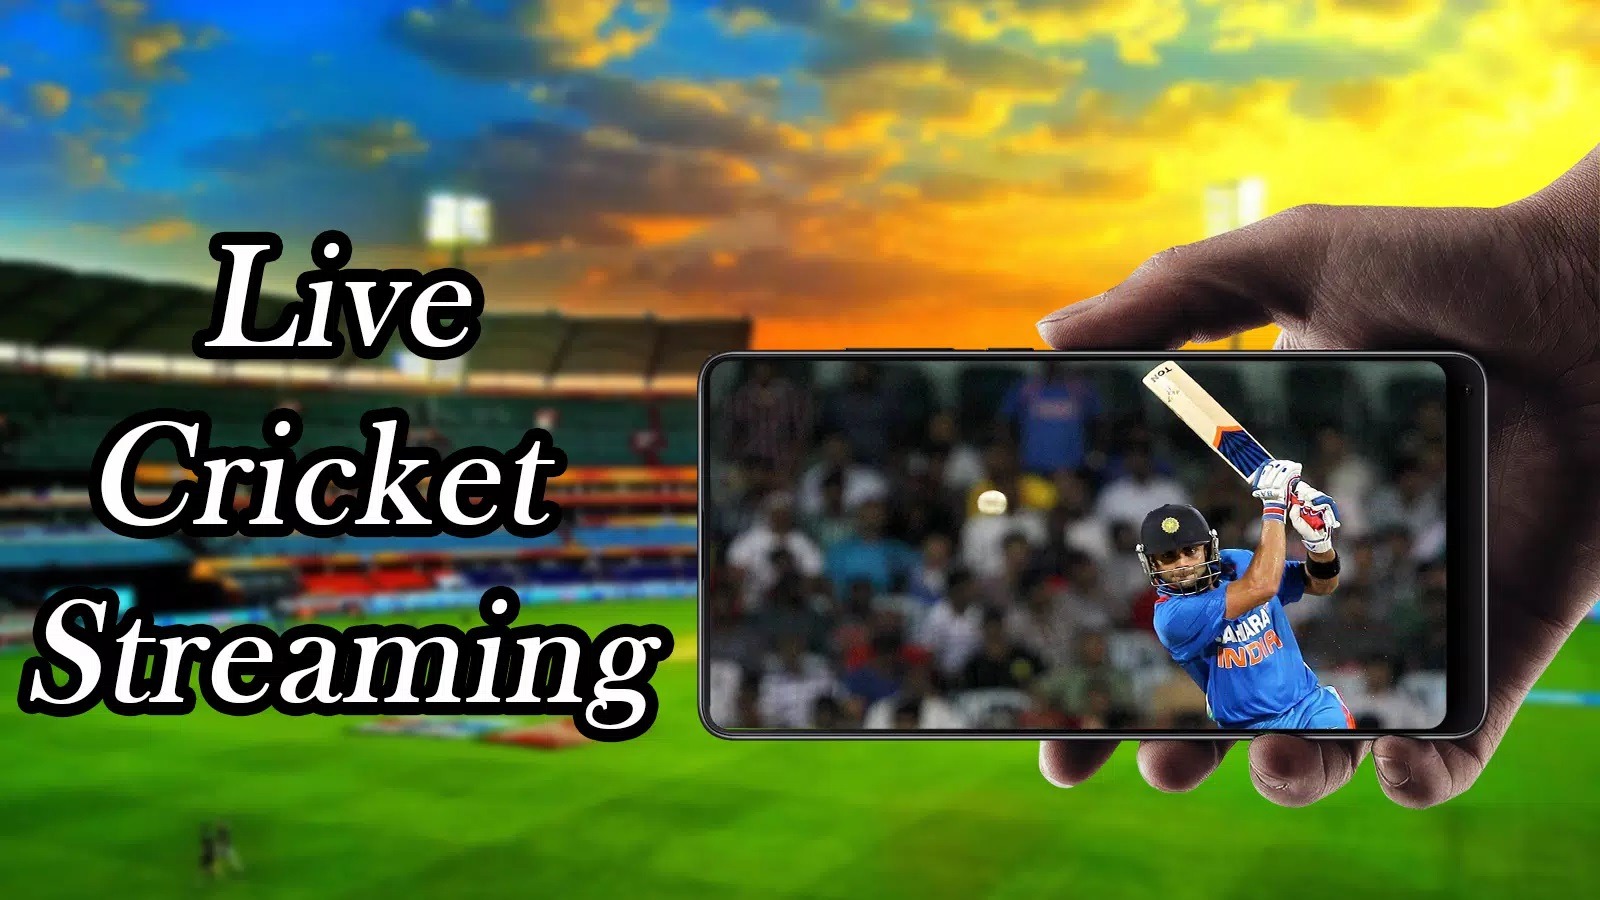 Smartcric- Watch Live Cricket Streaming Free